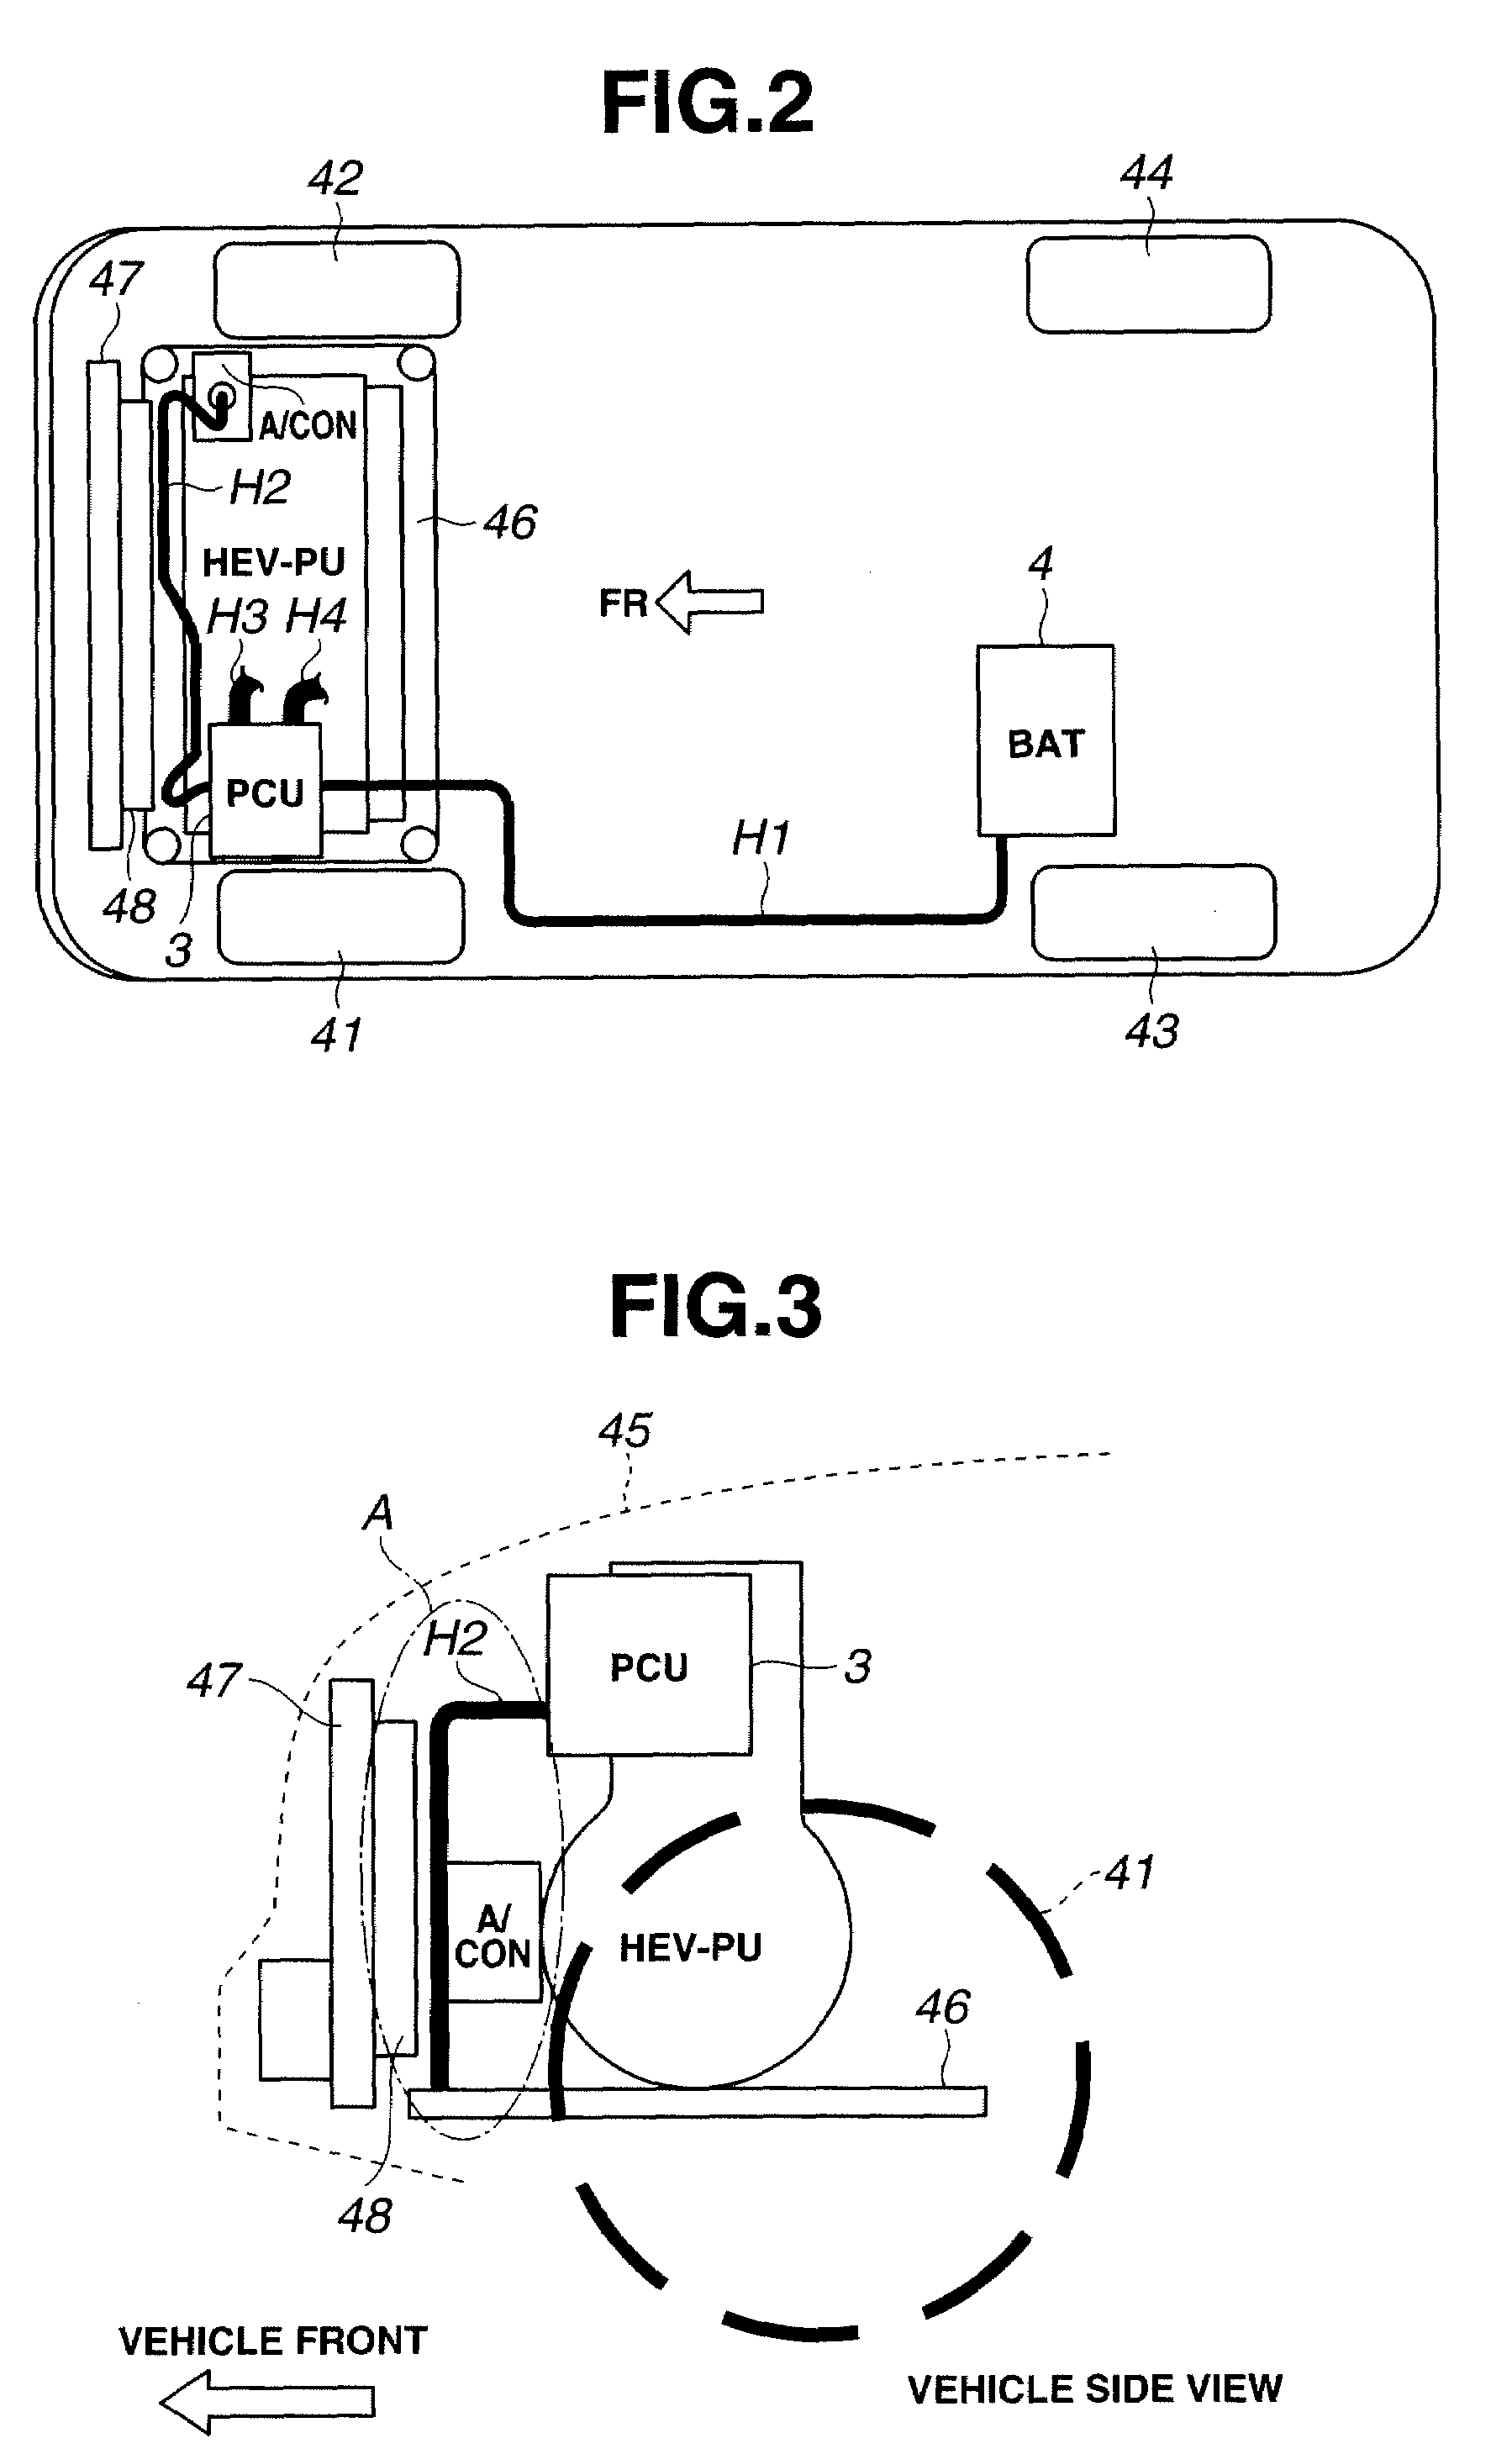 Harness routing structure for vehicle